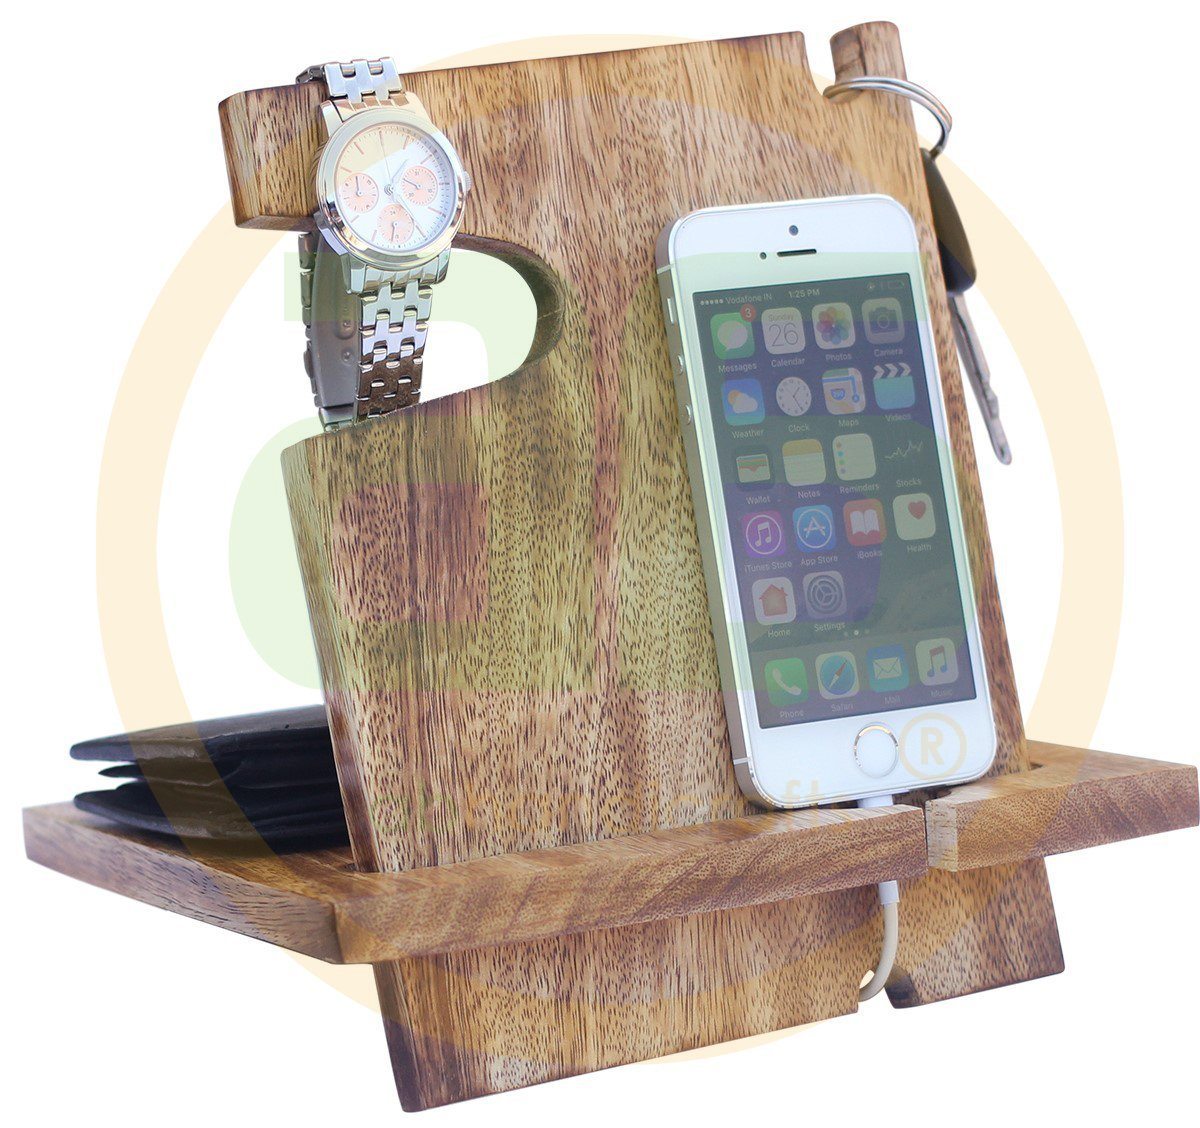 Father's Day Gift Ideas | Gifts For Dad | Gifts For Men | Phone Docking Station